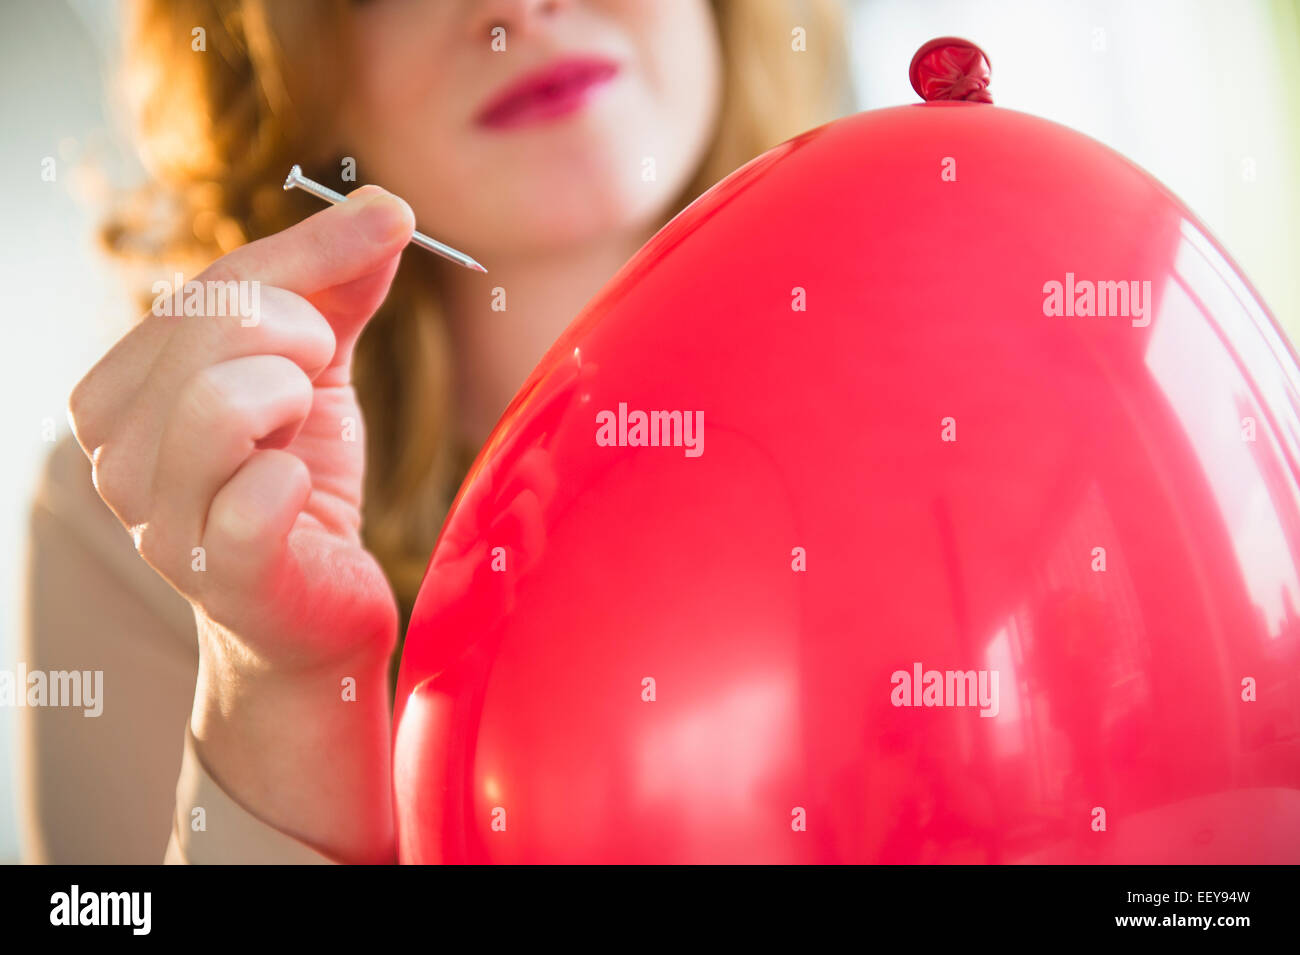 Young woman popping balloon Stock Photo